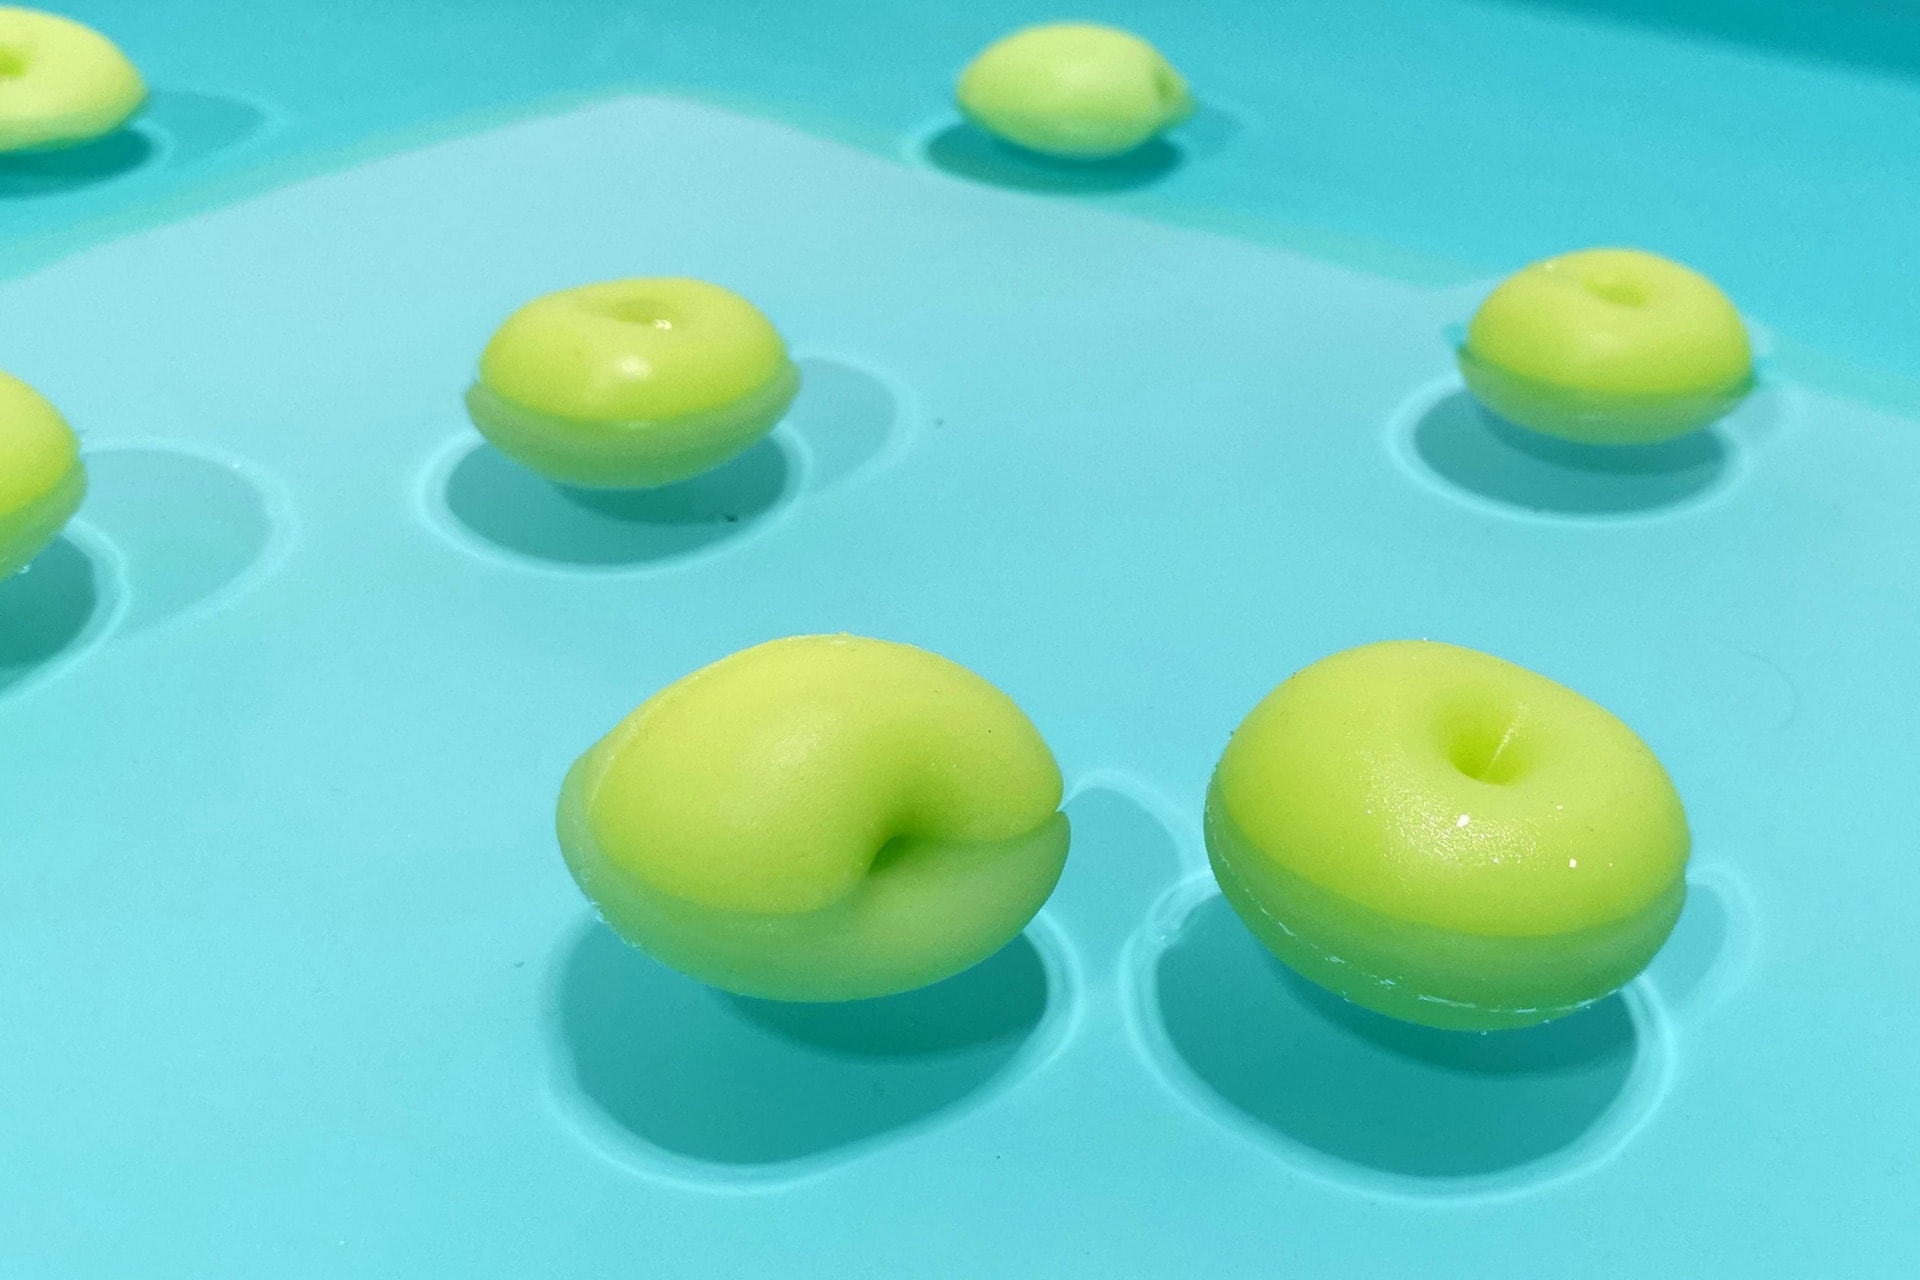 Casts of apples floating in a blue pool